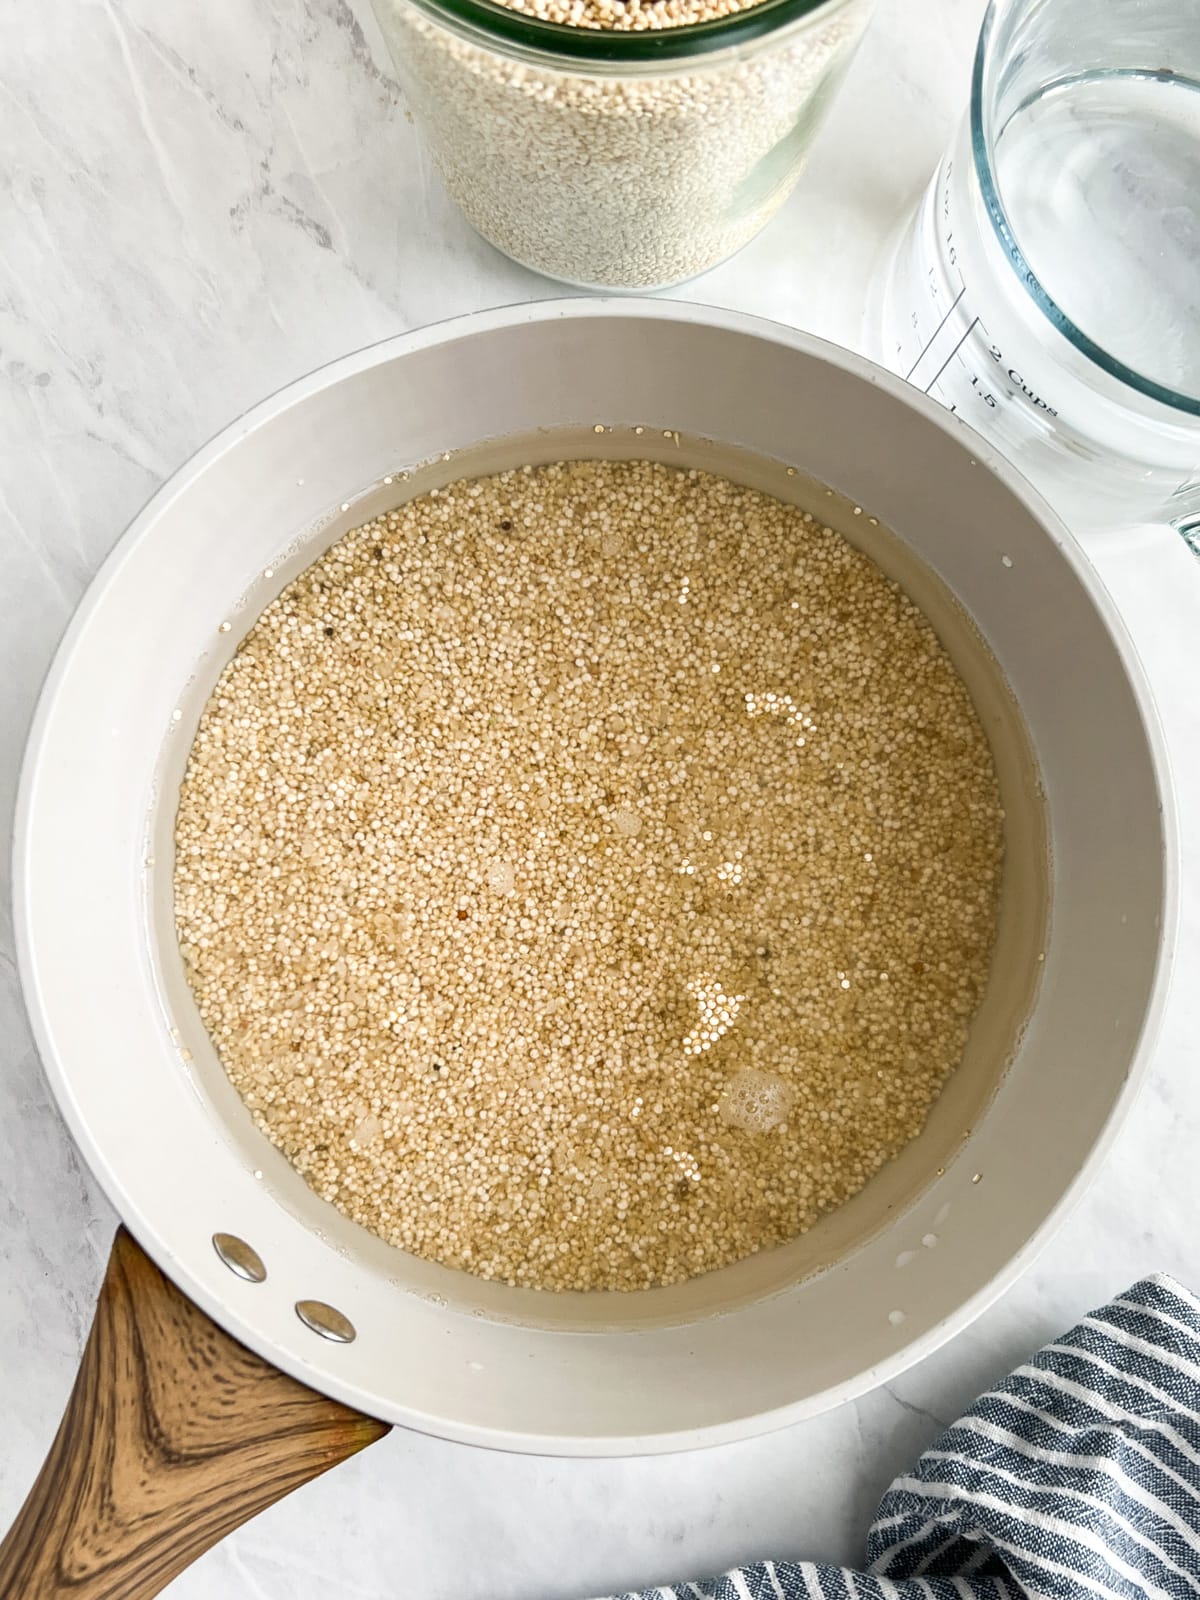 Saucepan filled with water and white quinoa.